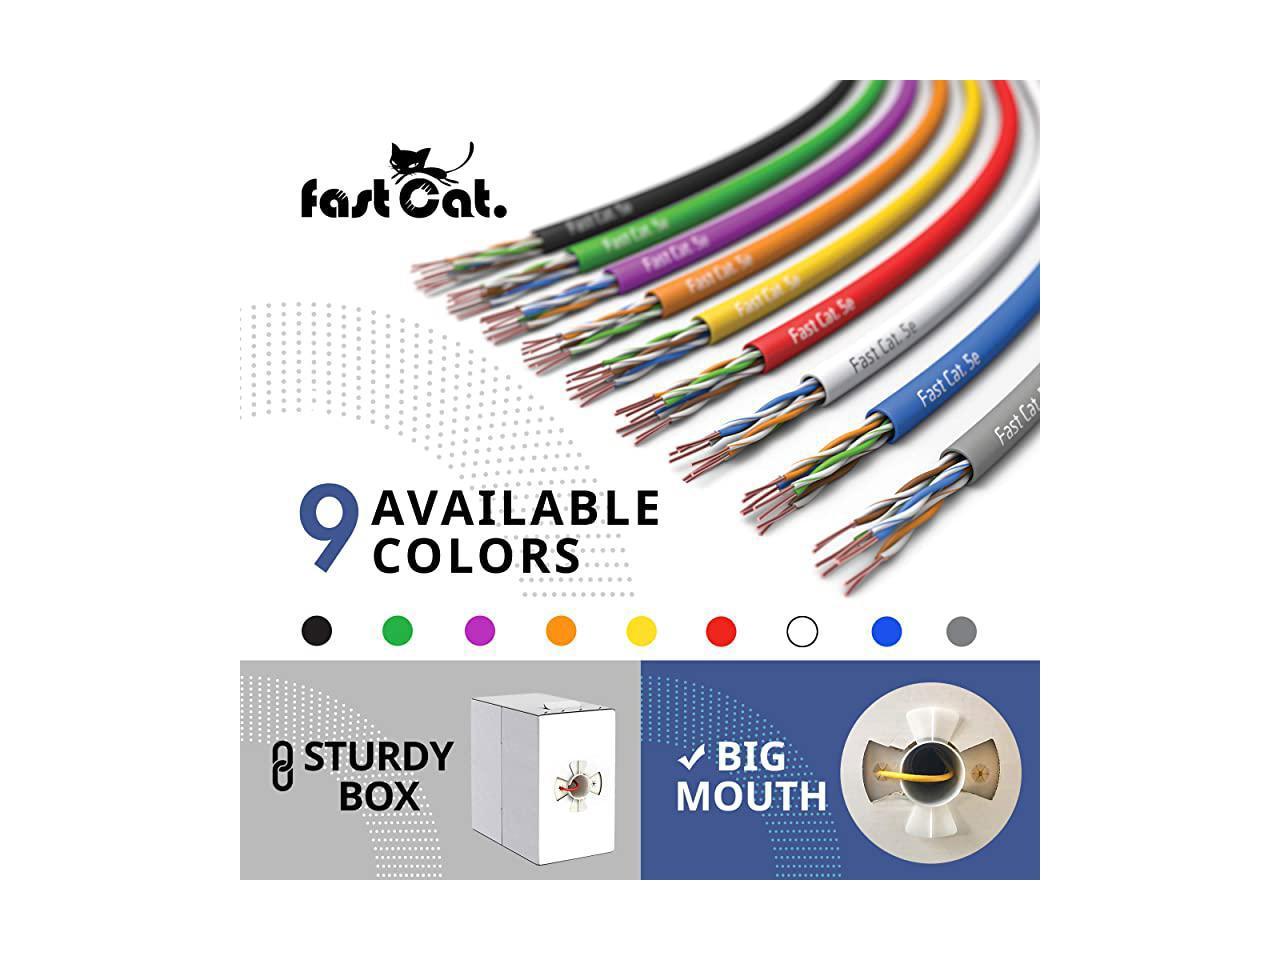 350MHZ / Gigabit Speed UTP LAN Cable Insulated Bare Copper Wire Internet Cable with FastReel Gray CMR fast Cat Cat5e Ethernet Cable 1000ft 